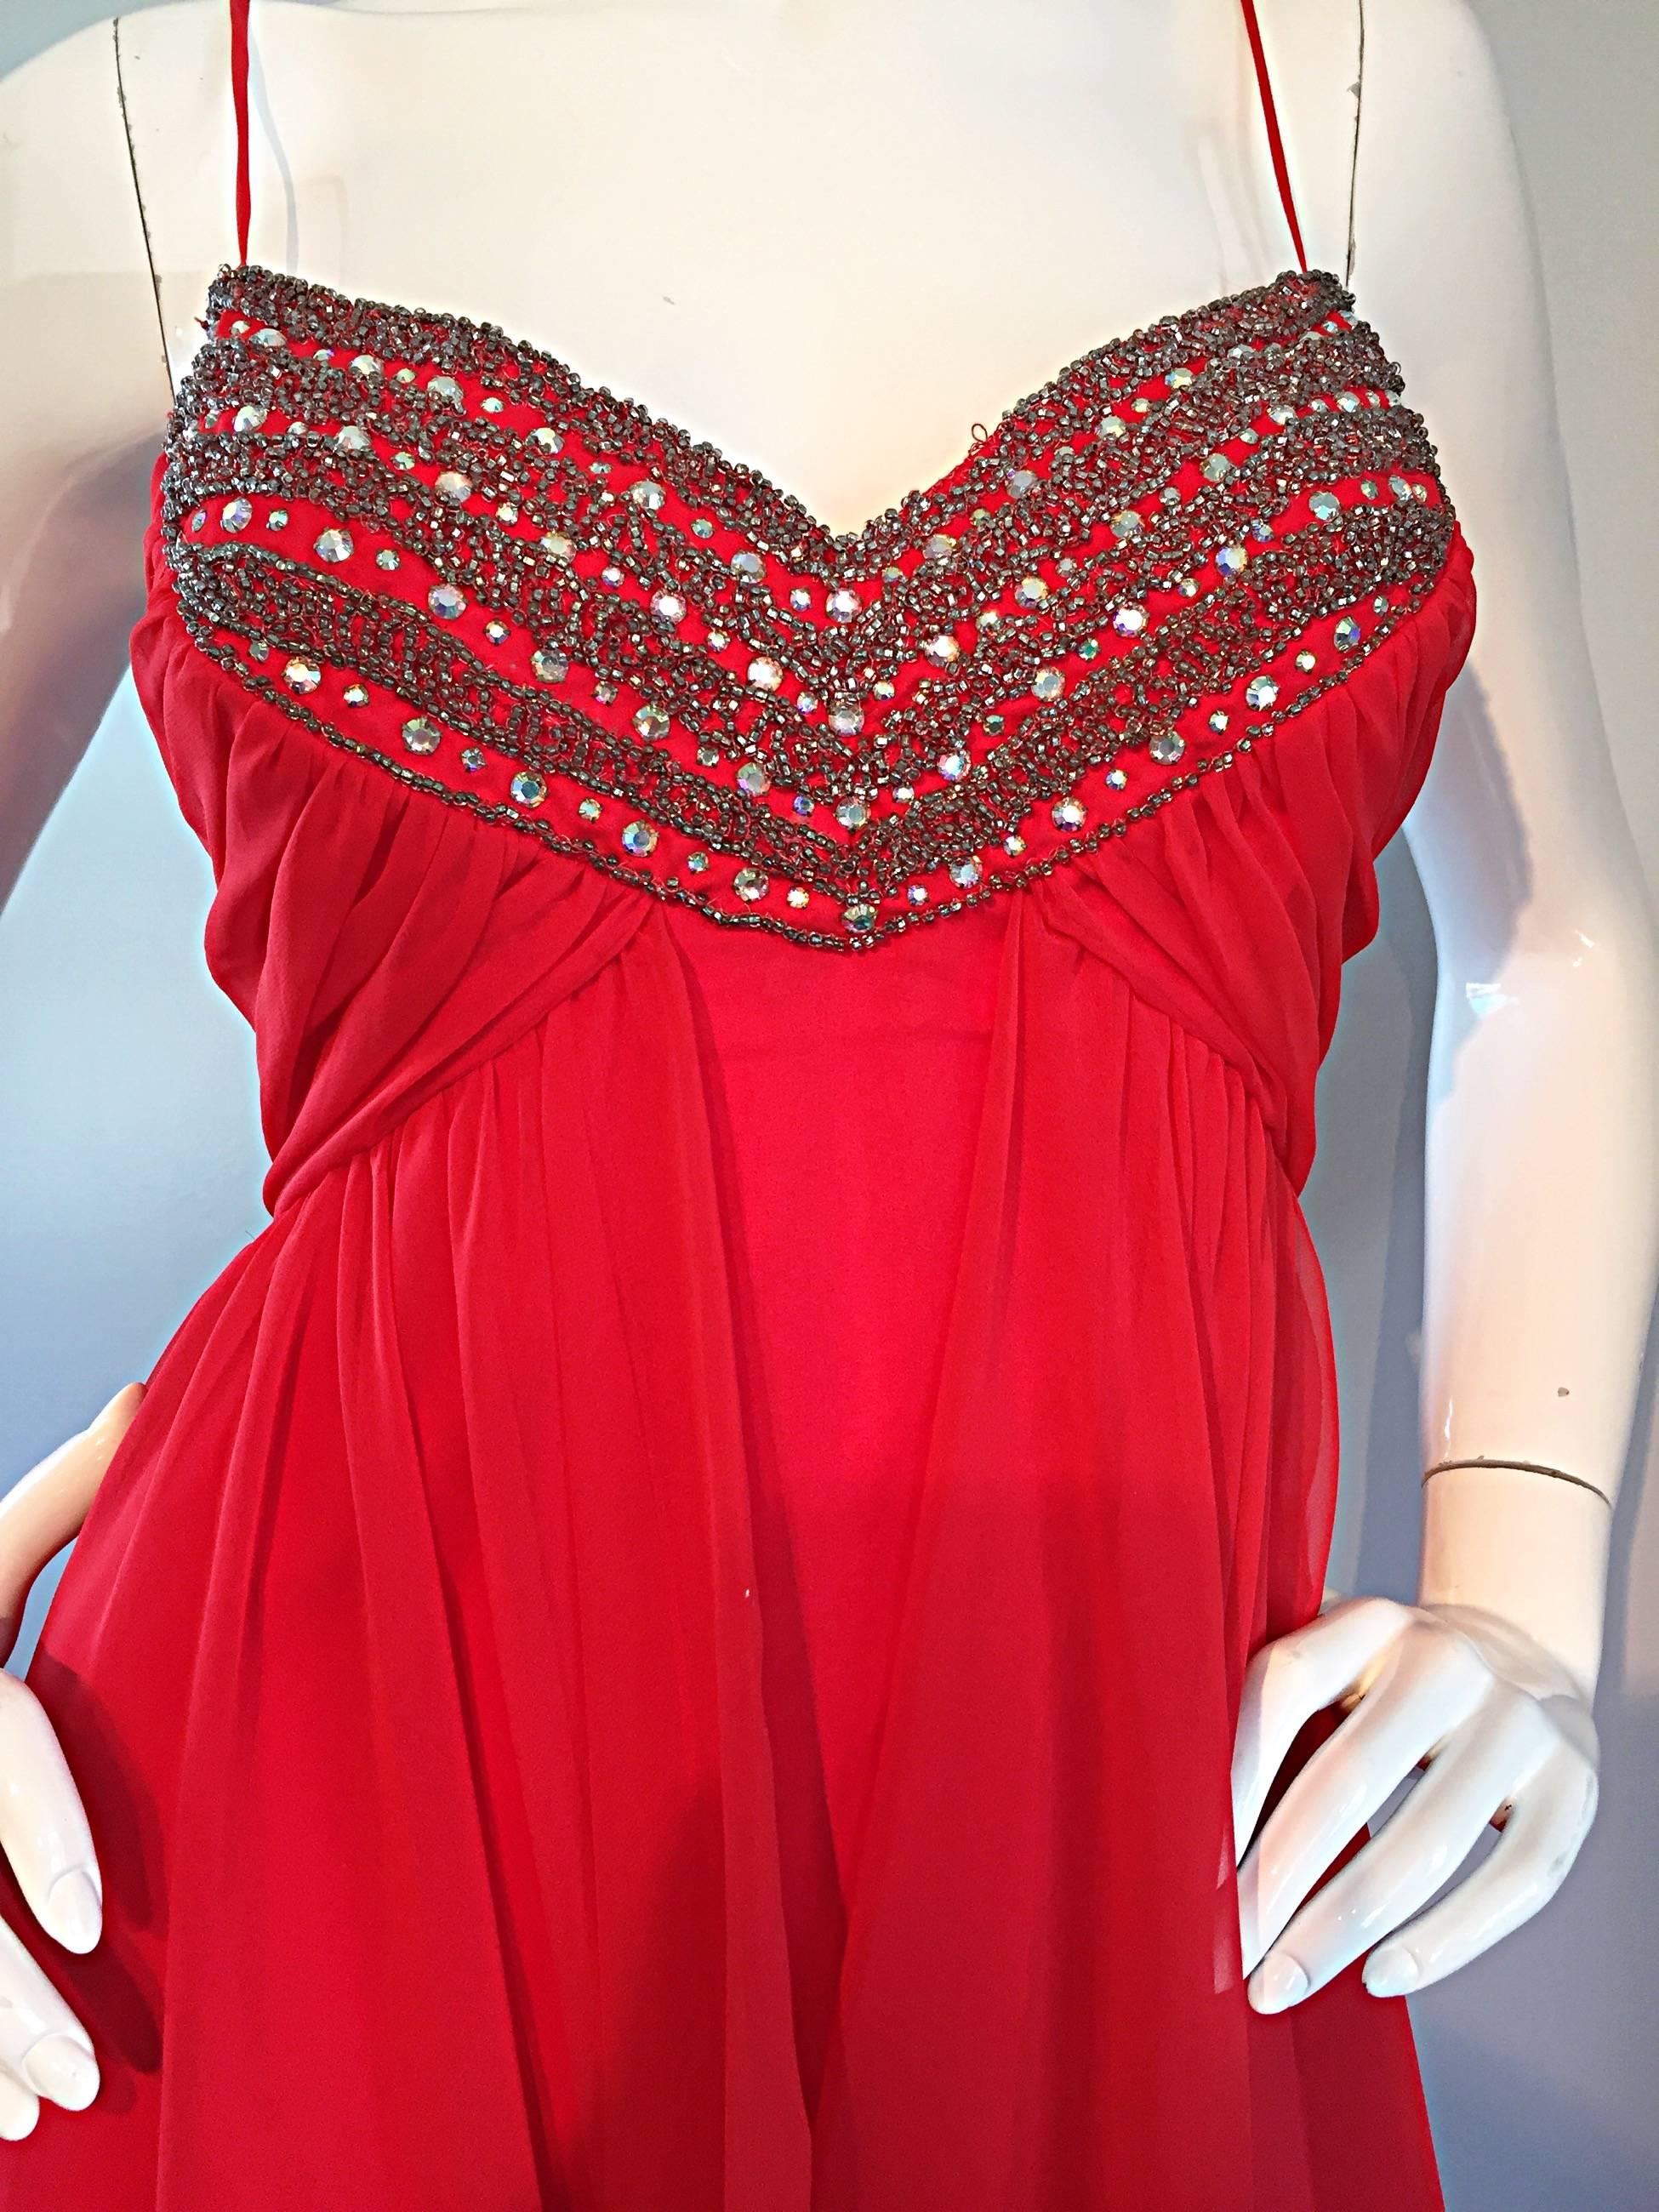 Exquisite 1970s Lipstick Red Chiffon Rhinestone Beaded Vintage 70s Goddess Gown  For Sale 1